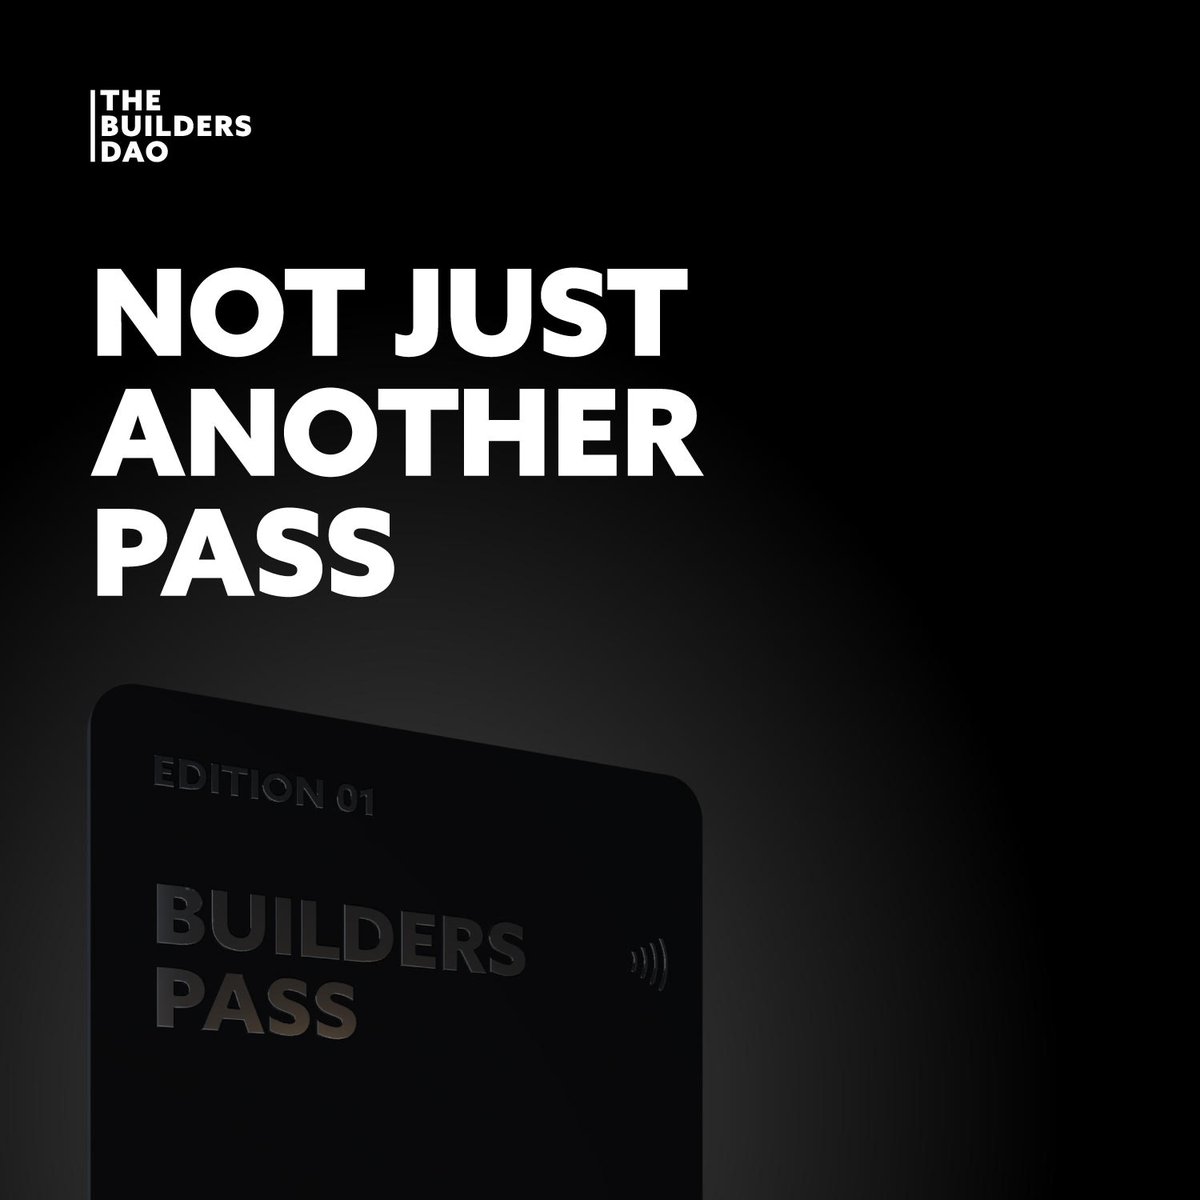 GM Builders 🏗️ All you need to know about the Builders Pass and why this is going to be a game-changer for the DAO! 🧵👇